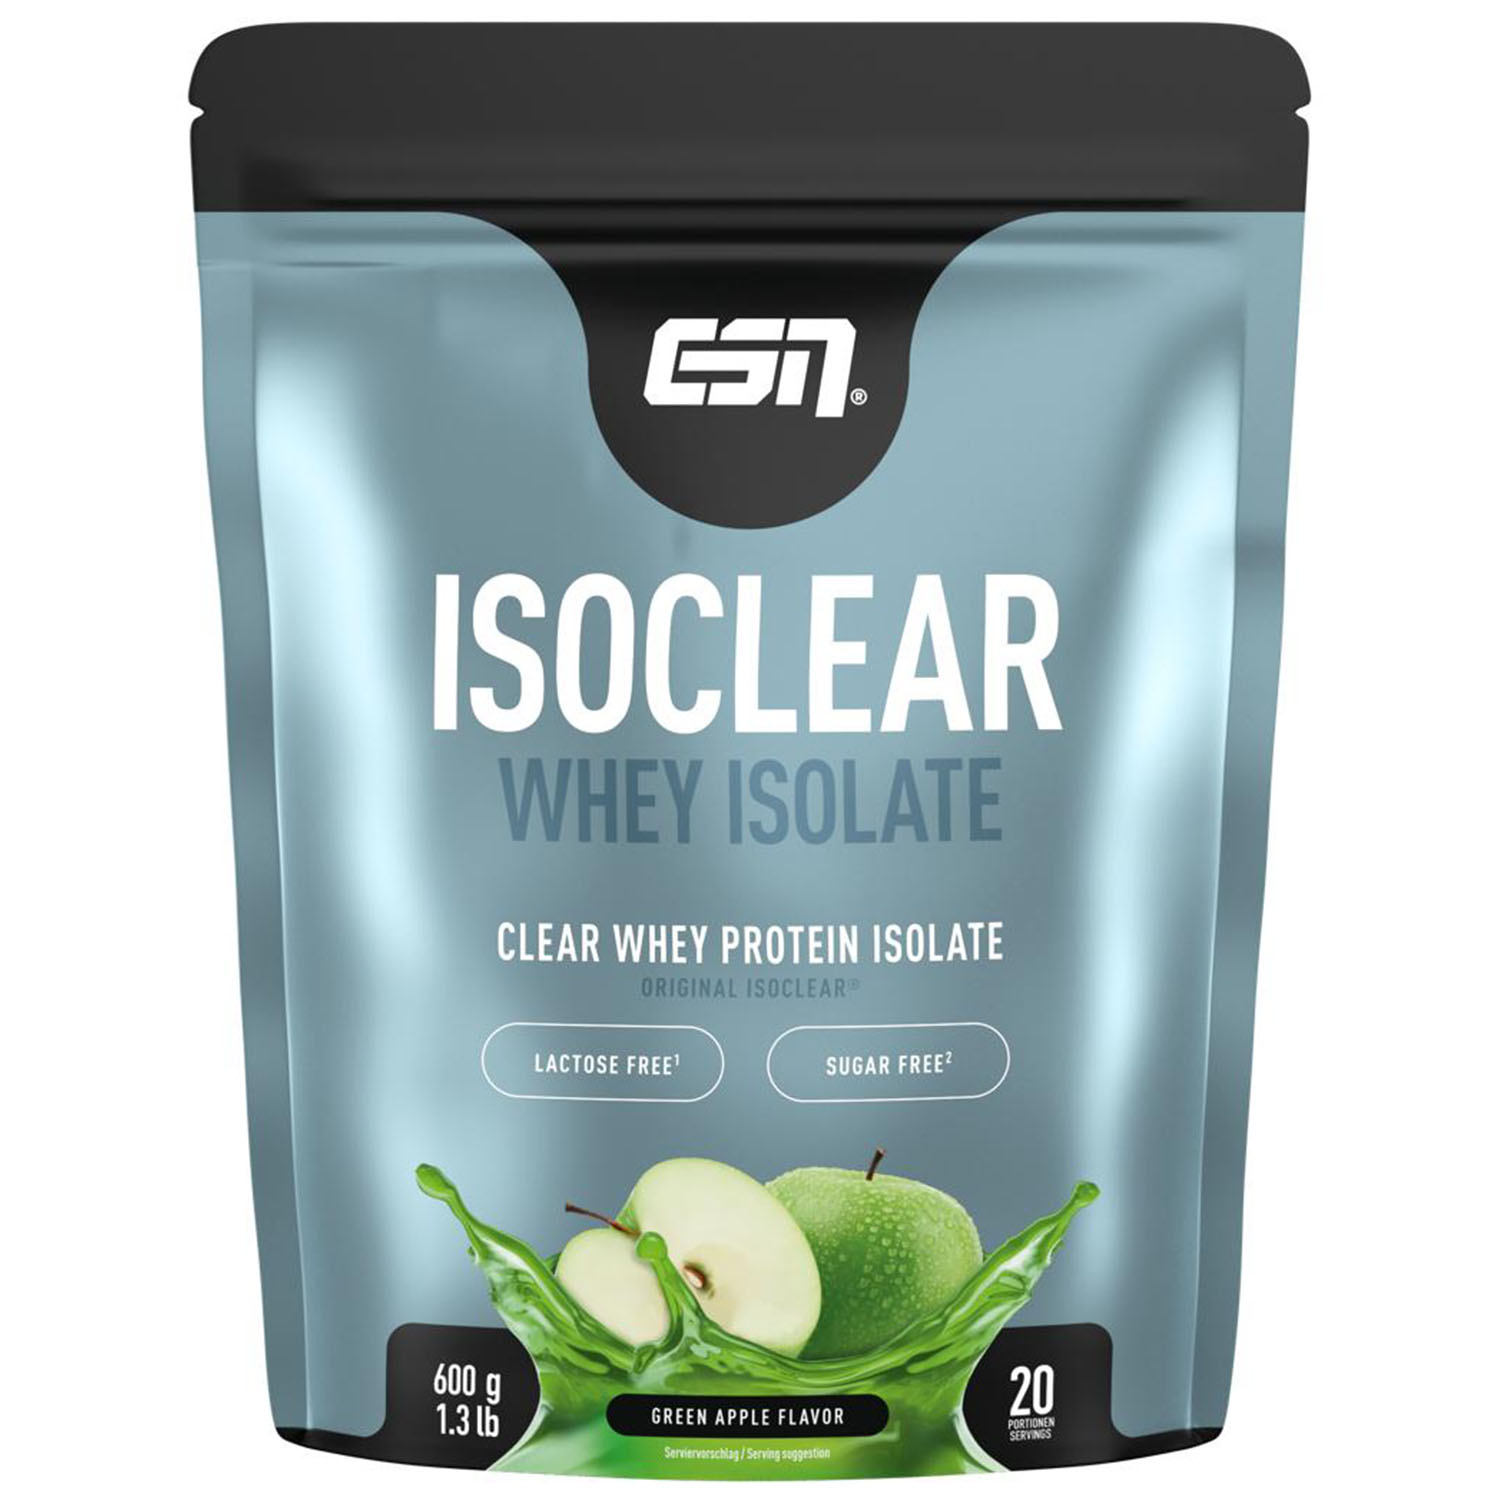 ESN Supplement Isoclear Whey Isolate, 600g, Green Apple